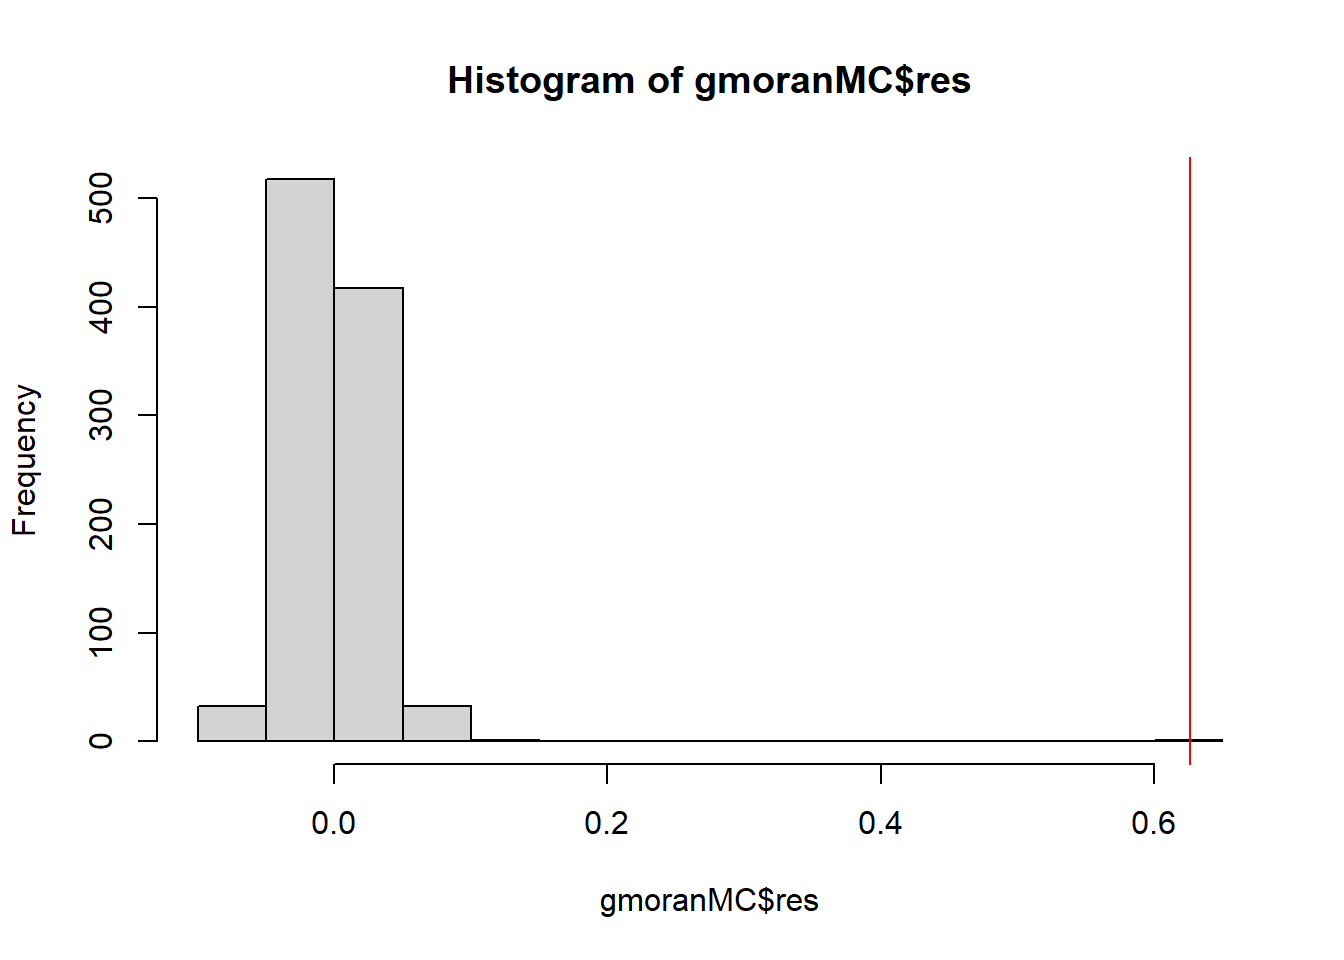 Histogram of the Moran's $I$ values for each of the simulated patterns in the Monte Carlo randomization approach. The red line represents the Moran's $I$ obtained for the real data.